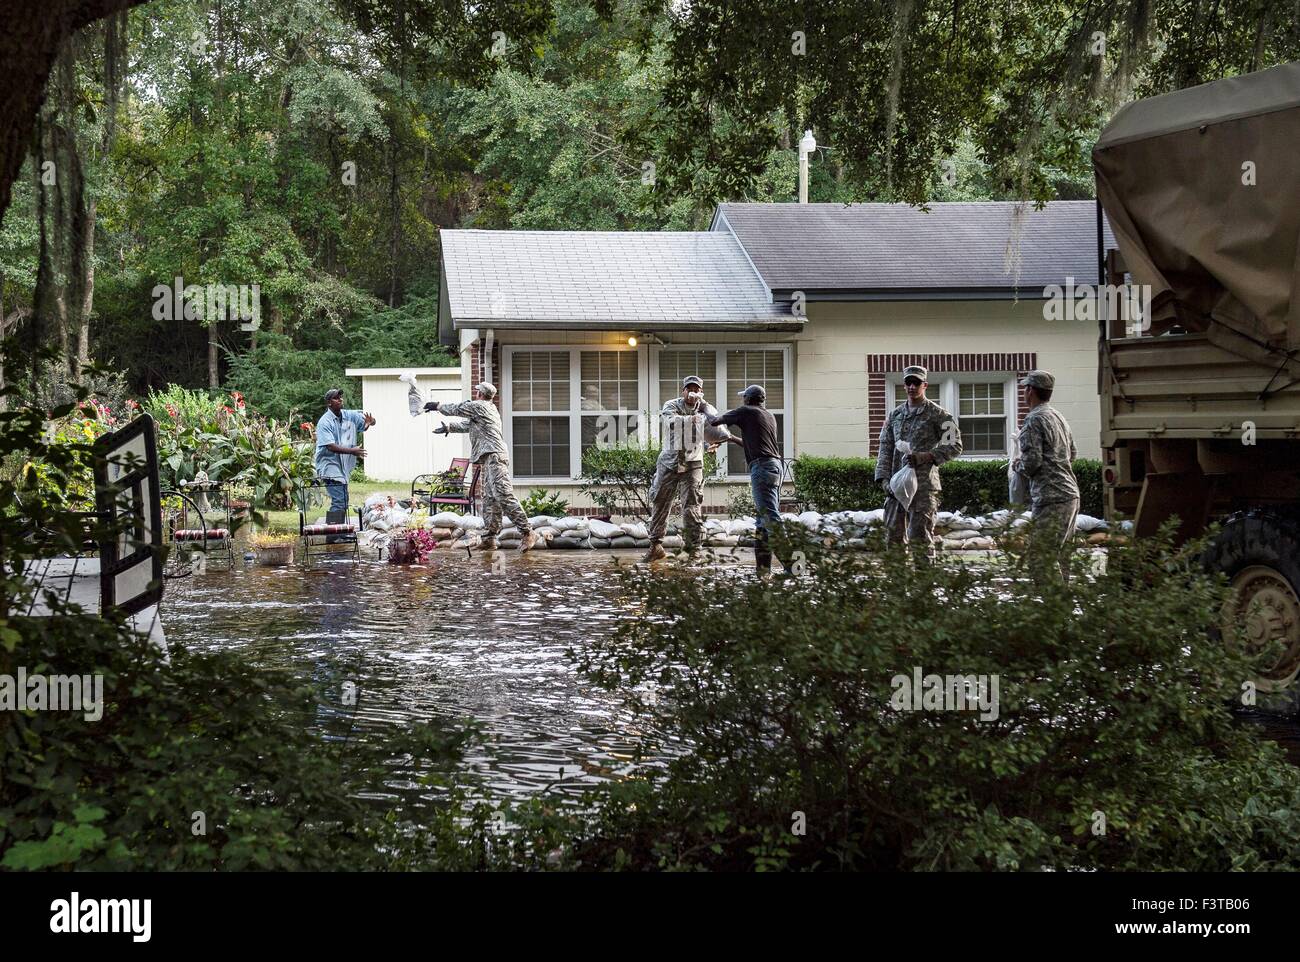 South Carolina National Guard Soldiers unload sandbags to help a resident protect their property from floodwaters October 9, 2015 in Parkers Ferry, South Carolina. Large parts of South Carolina suffered from record setting rains that flooded large portions of the state. Stock Photo